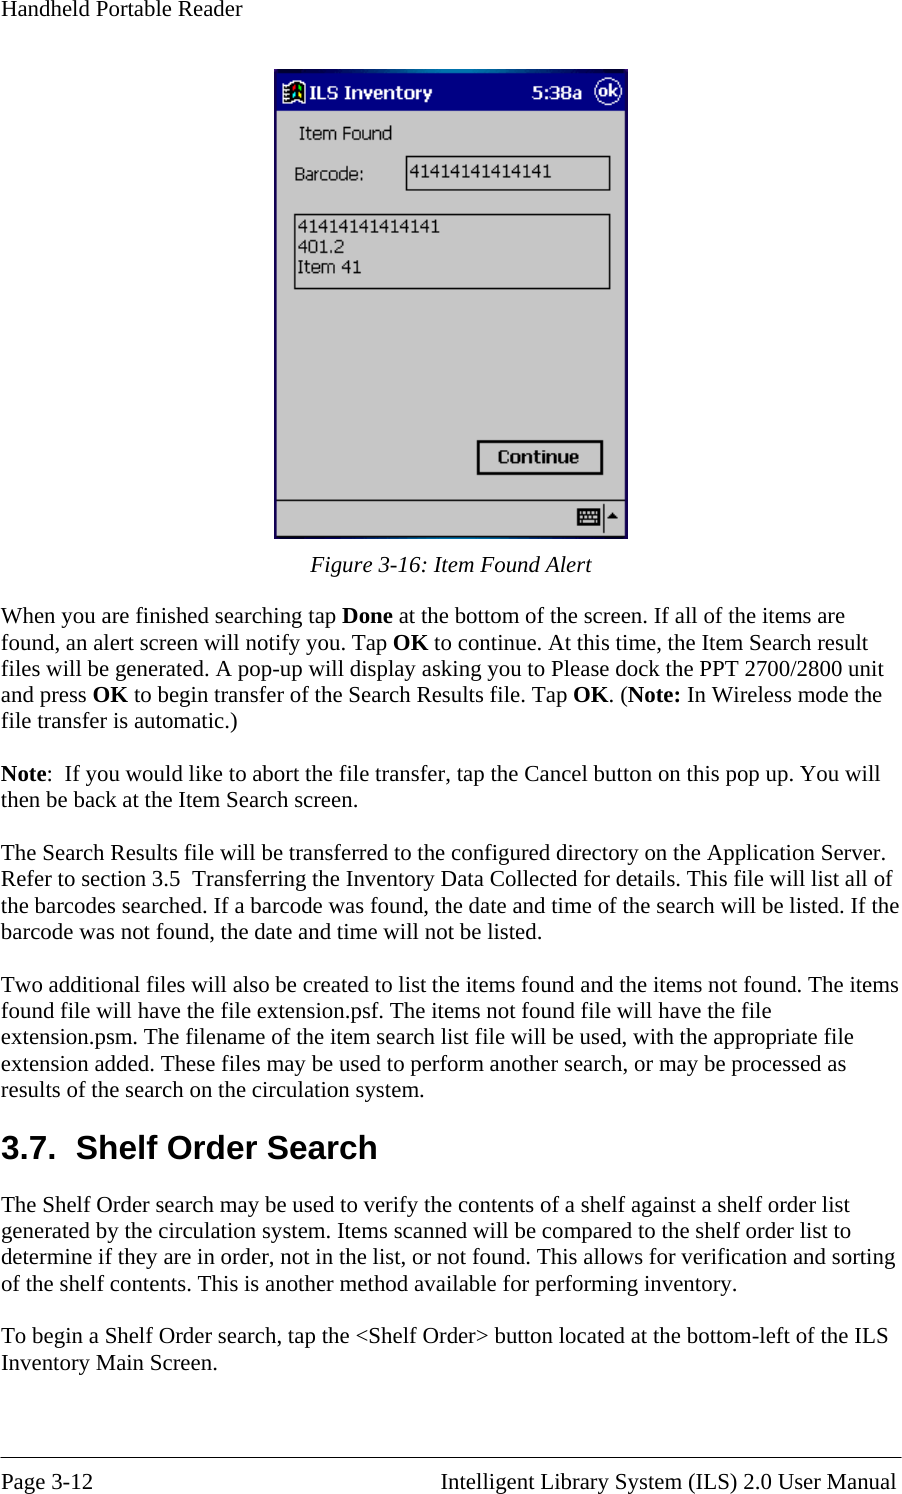 Handheld Portable Reader   Figure 3-16: Item Found Alert When you are finished searc  If all of the items are ote:  If you would like to abort the file transfer, tap the Cancel button on this pop up. You will en be back at the Item Search screen. he Search Results file will be transferred to the configured directory on the Application Server. y Data Collected for details. This file will list all of as found, the date and time of the search will be listed. If the und and the items not found. The items .7.  Shelf Order Search on system. Items scanned will be compared to the shelf order list to determine if they are in order, not in the list, or not found. This allows for verification and sorting of the shelf contents. This is another method available for performing inventory.  To begin a Shelf Order search, tap the &lt;Shelf Order&gt; button located at the bottom-left of the ILS hing tap Done at the bottom of the screen.found, an alert screen will notify you. Tap OK to continue. At this time, the Item Search result files will be generated. A pop-up will display asking you to Please dock the PPT 2700/2800 unit and press OK to begin transfer of the Search Results file. Tap OK. (Note: In Wireless mode the file transfer is automatic.)  Nth TRefer to section 3.5  Transferring the Inventorthe barcodes searched. If a barcode wbarcode was not found, the date and time will not be listed.  wo additional files will also be created to list the items foTfound file will have the file extension.psf. The items not found file will have the file extension.psm. The filename of the item search list file will be used, with the appropriate file extension added. These files may be used to perform another search, or may be processed as esults of the search on the circulation system. r3The Shelf Order search may be used to verify the contents of a shelf against a shelf order list generated by the circulatiInventory Main Screen.   Page 3-12                                                       Intelligent Library System (ILS) 2.0 User Manual 